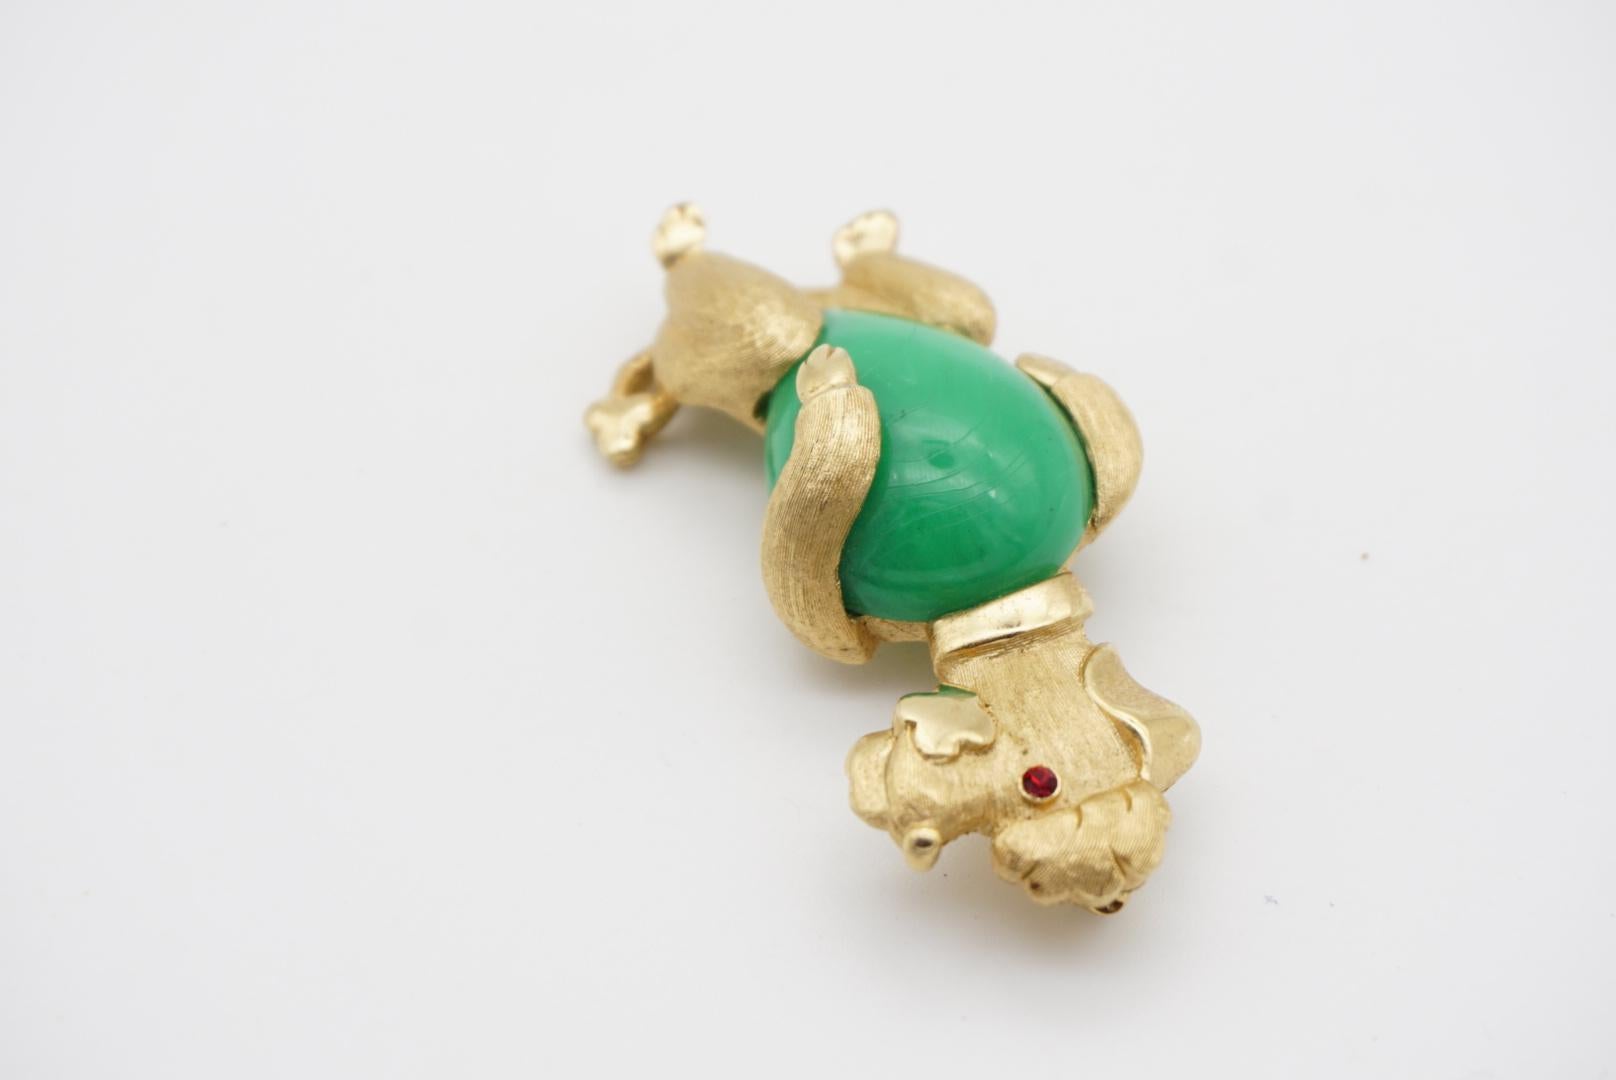 Crown Trifari Vintage 1950s Poodle Dog Jelly Belly Green Jade Cabochon Brooch For Sale 1